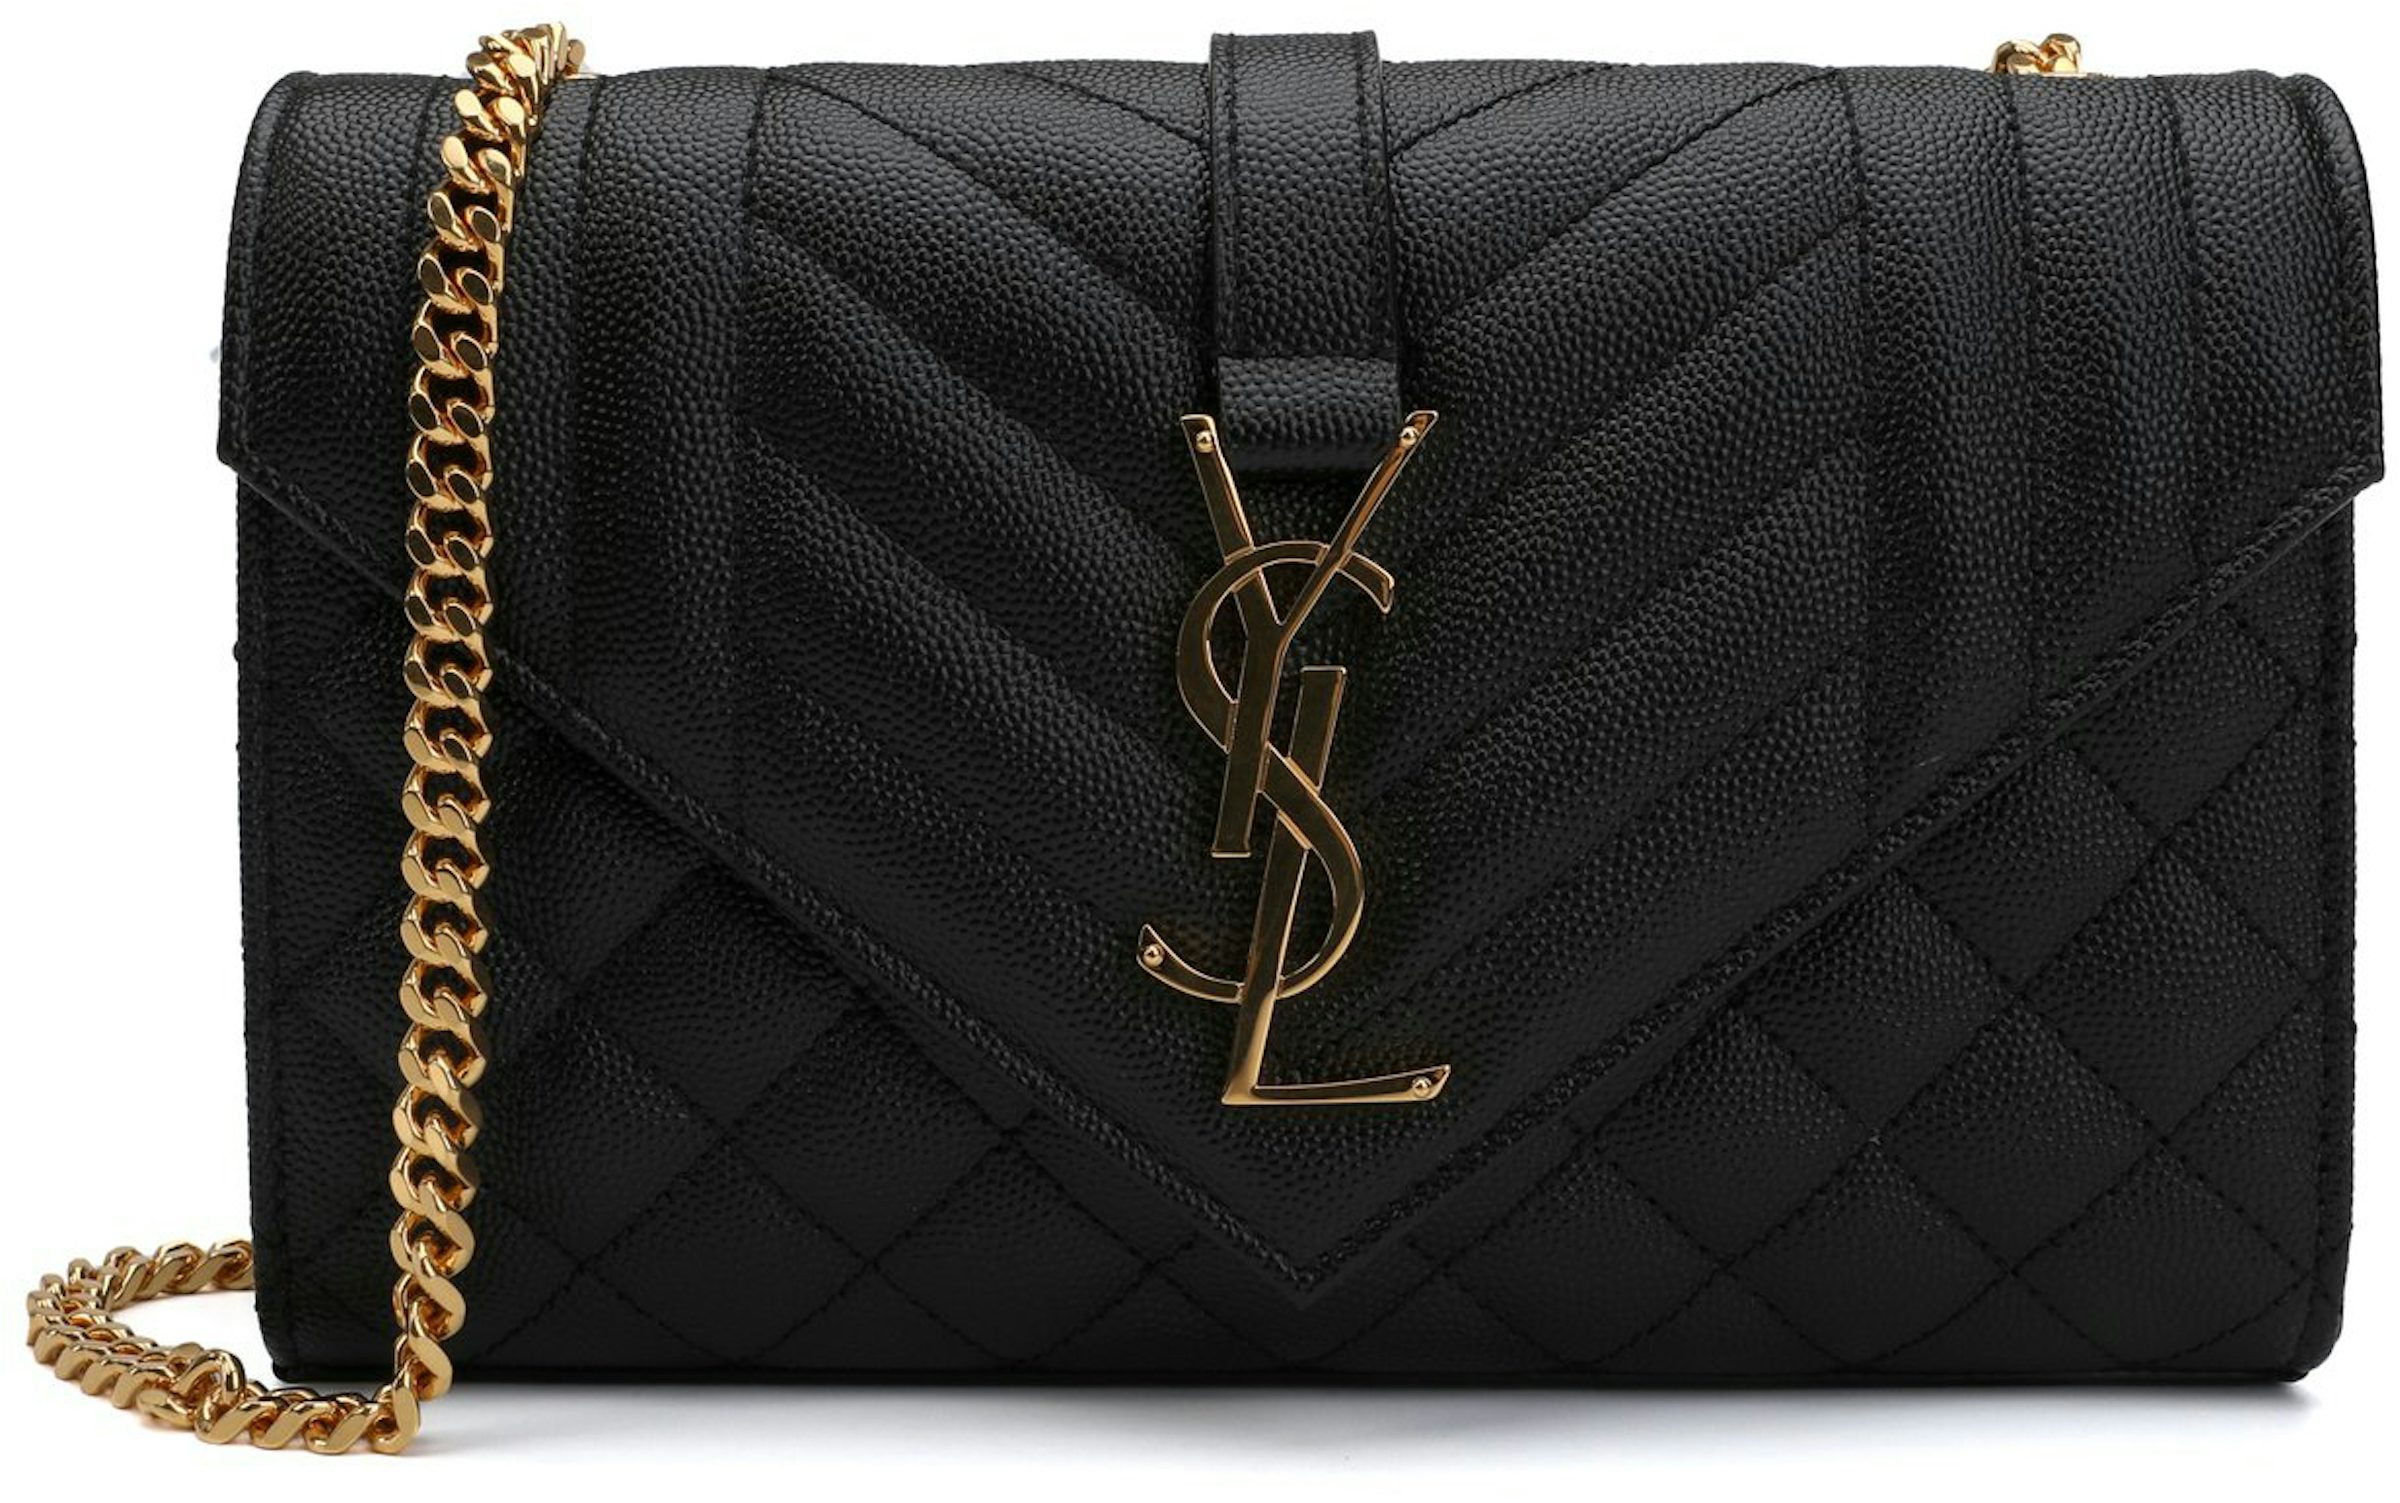 Saint Laurent Small Ysl Envelope Flap Wallet On Chain in Natural